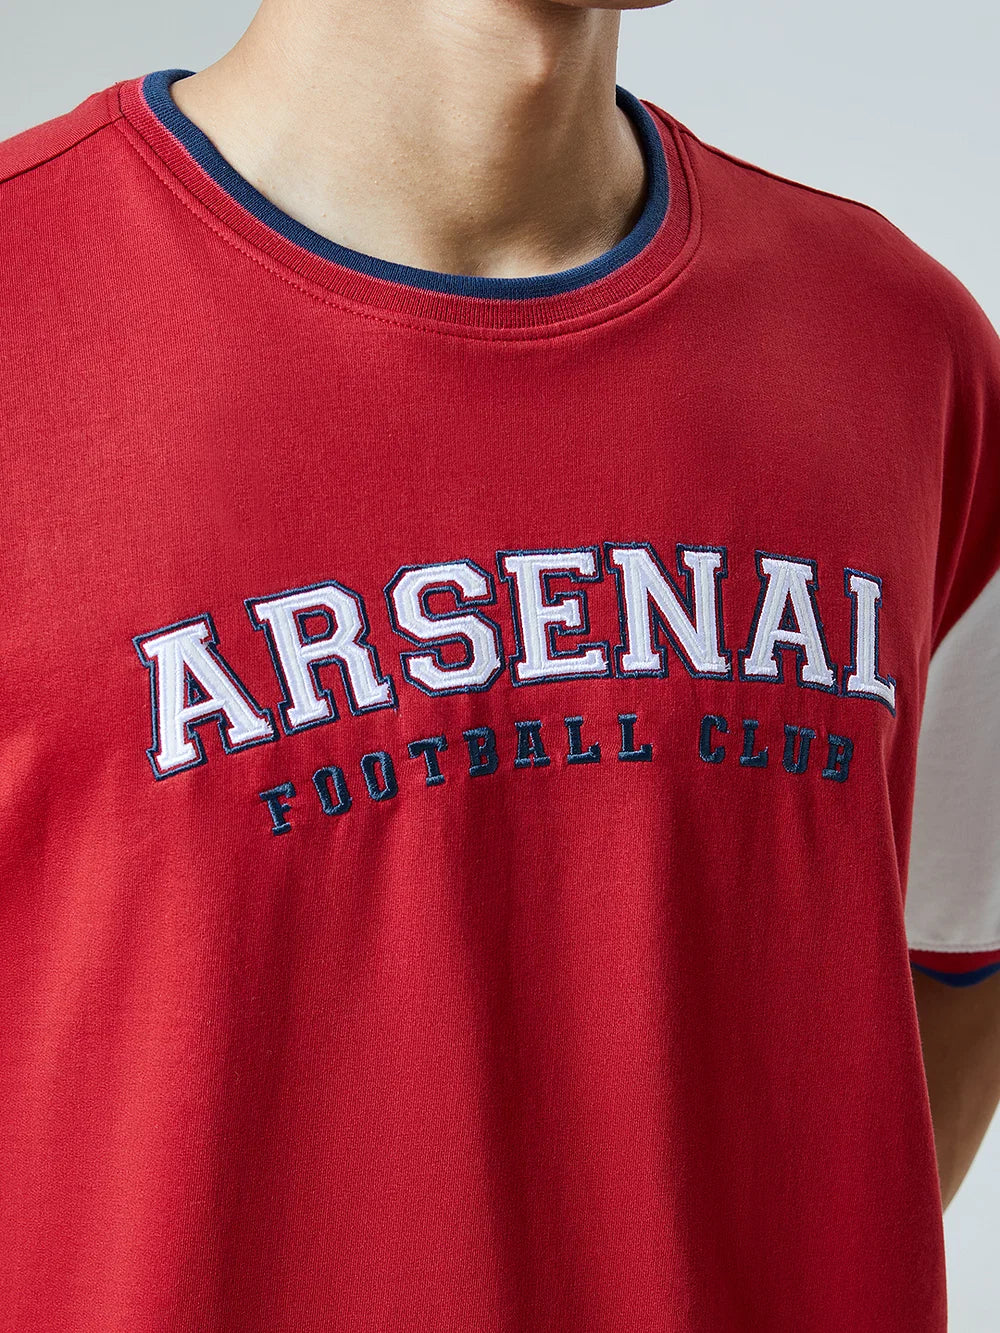 Arsenal FC Official Colors (UK version)